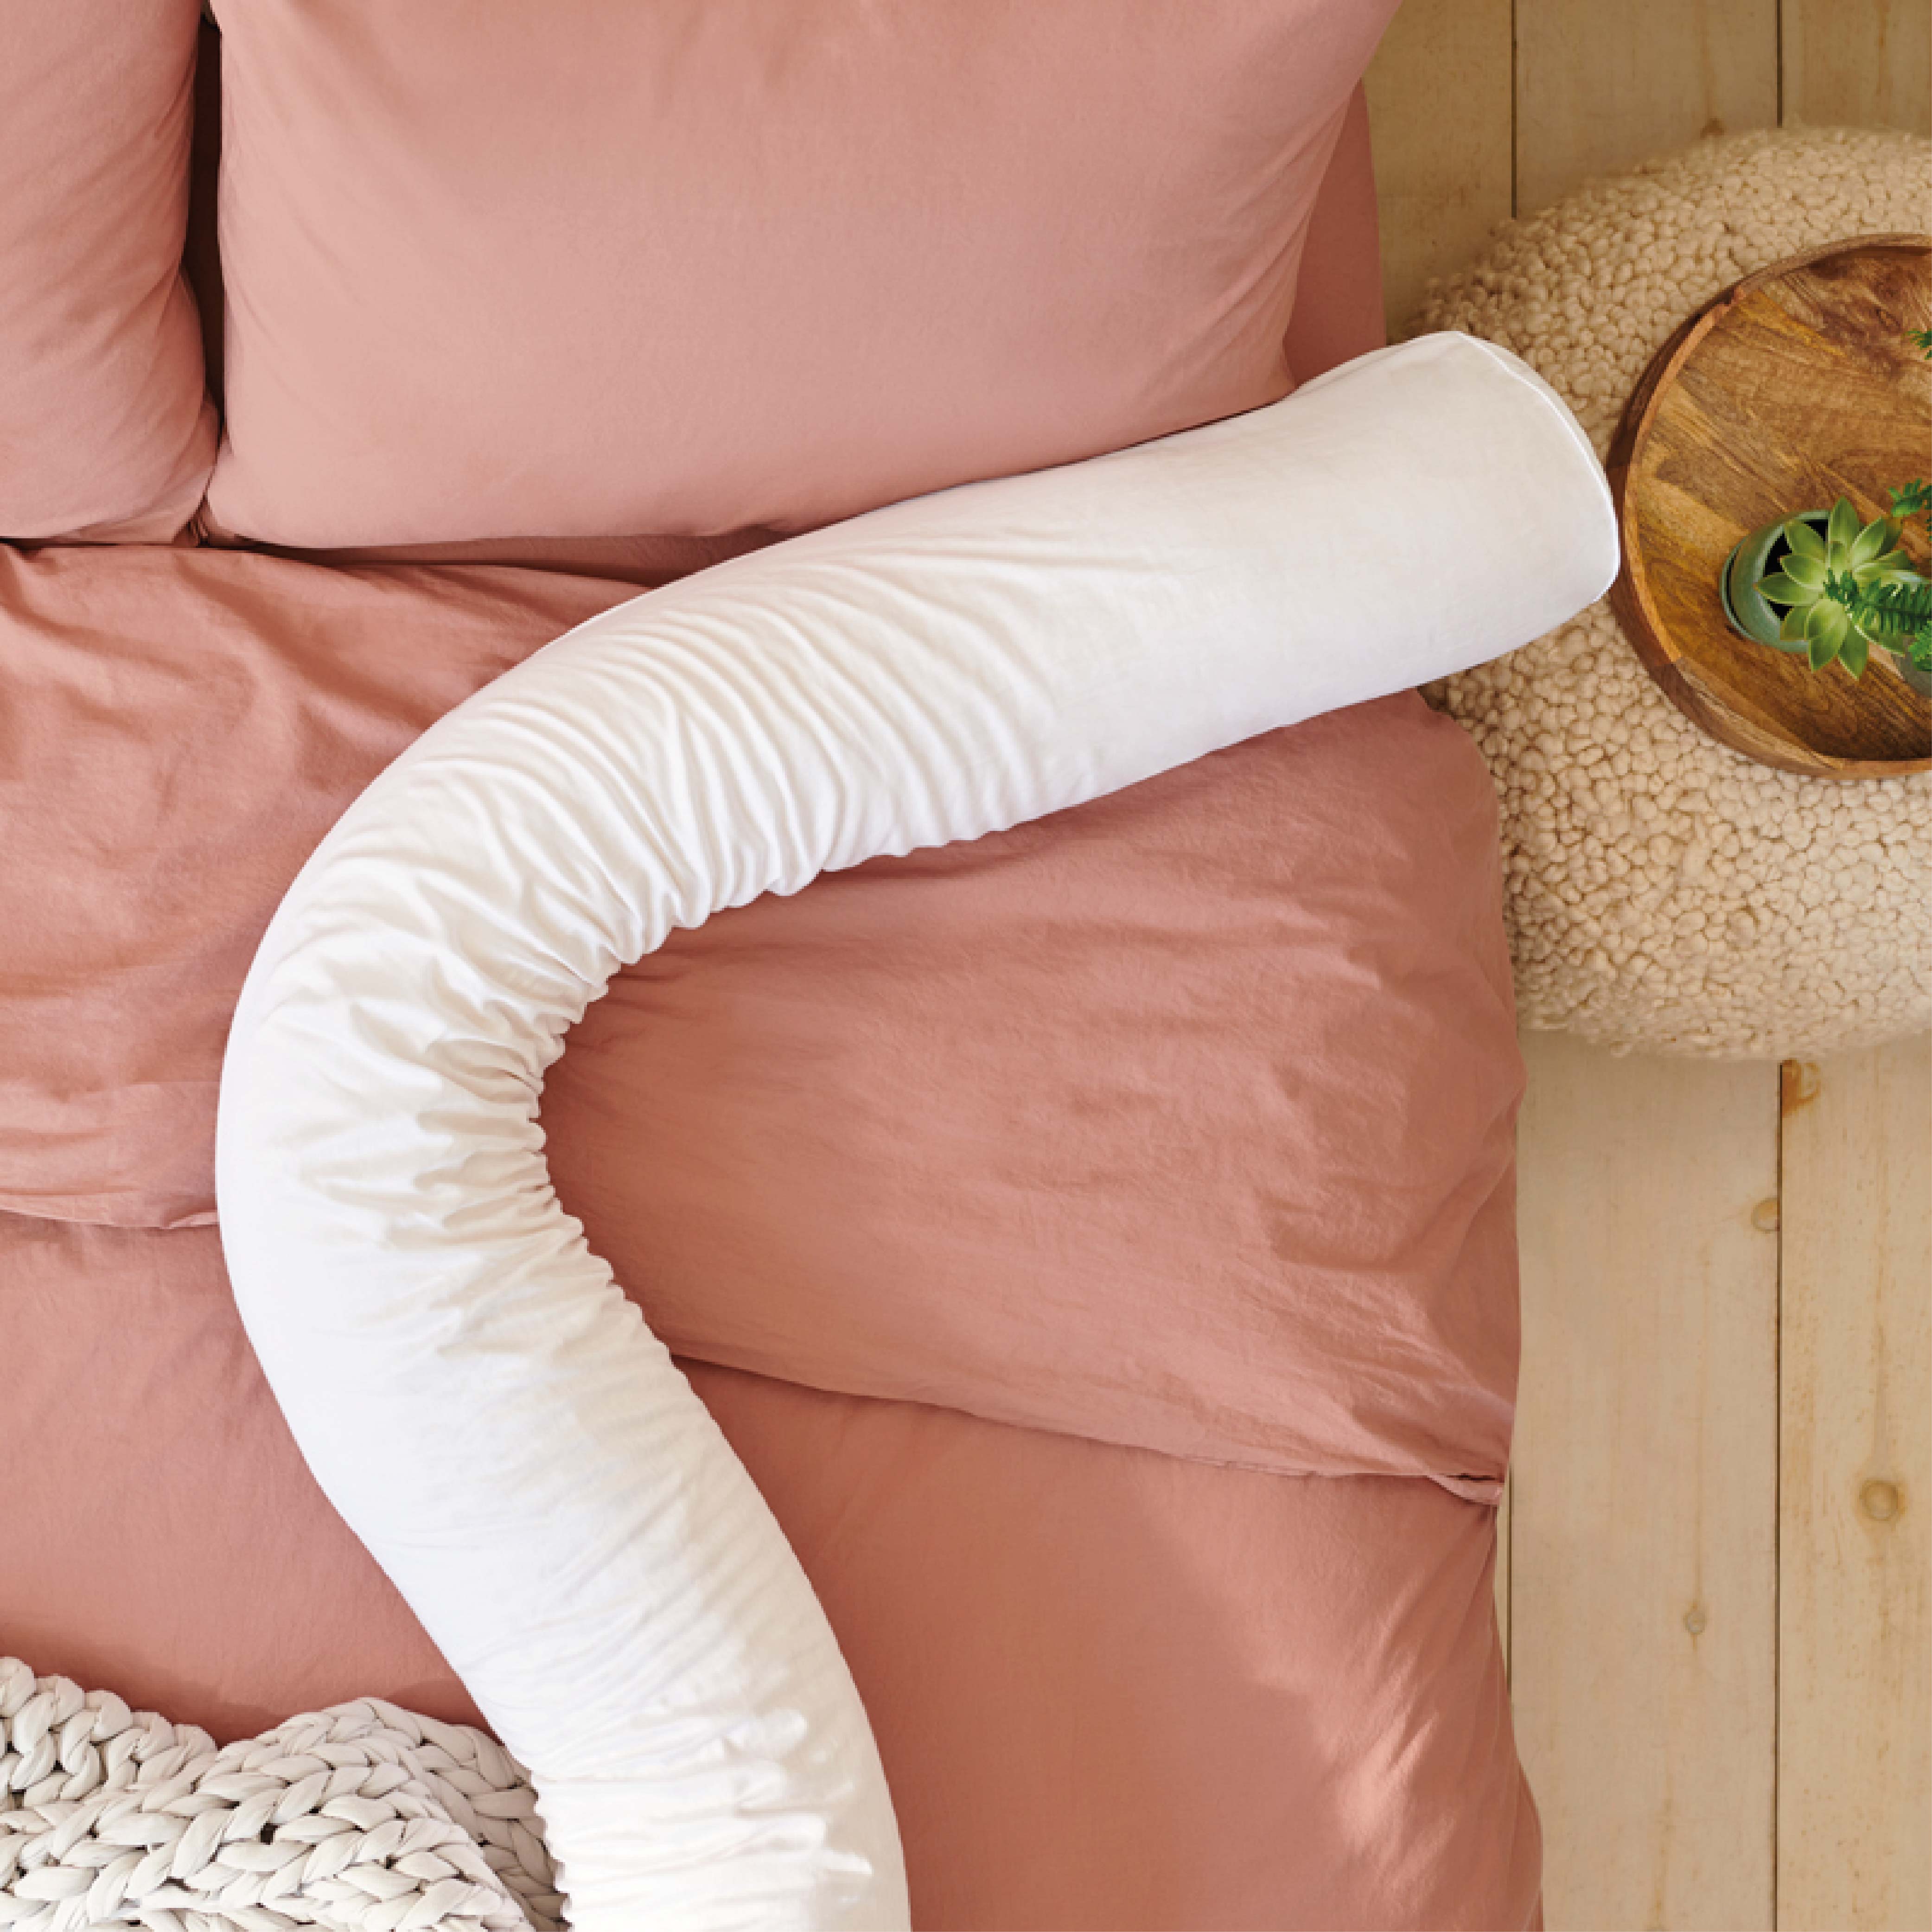 Do you need a pregnancy pillow? When to start, benefits, and more